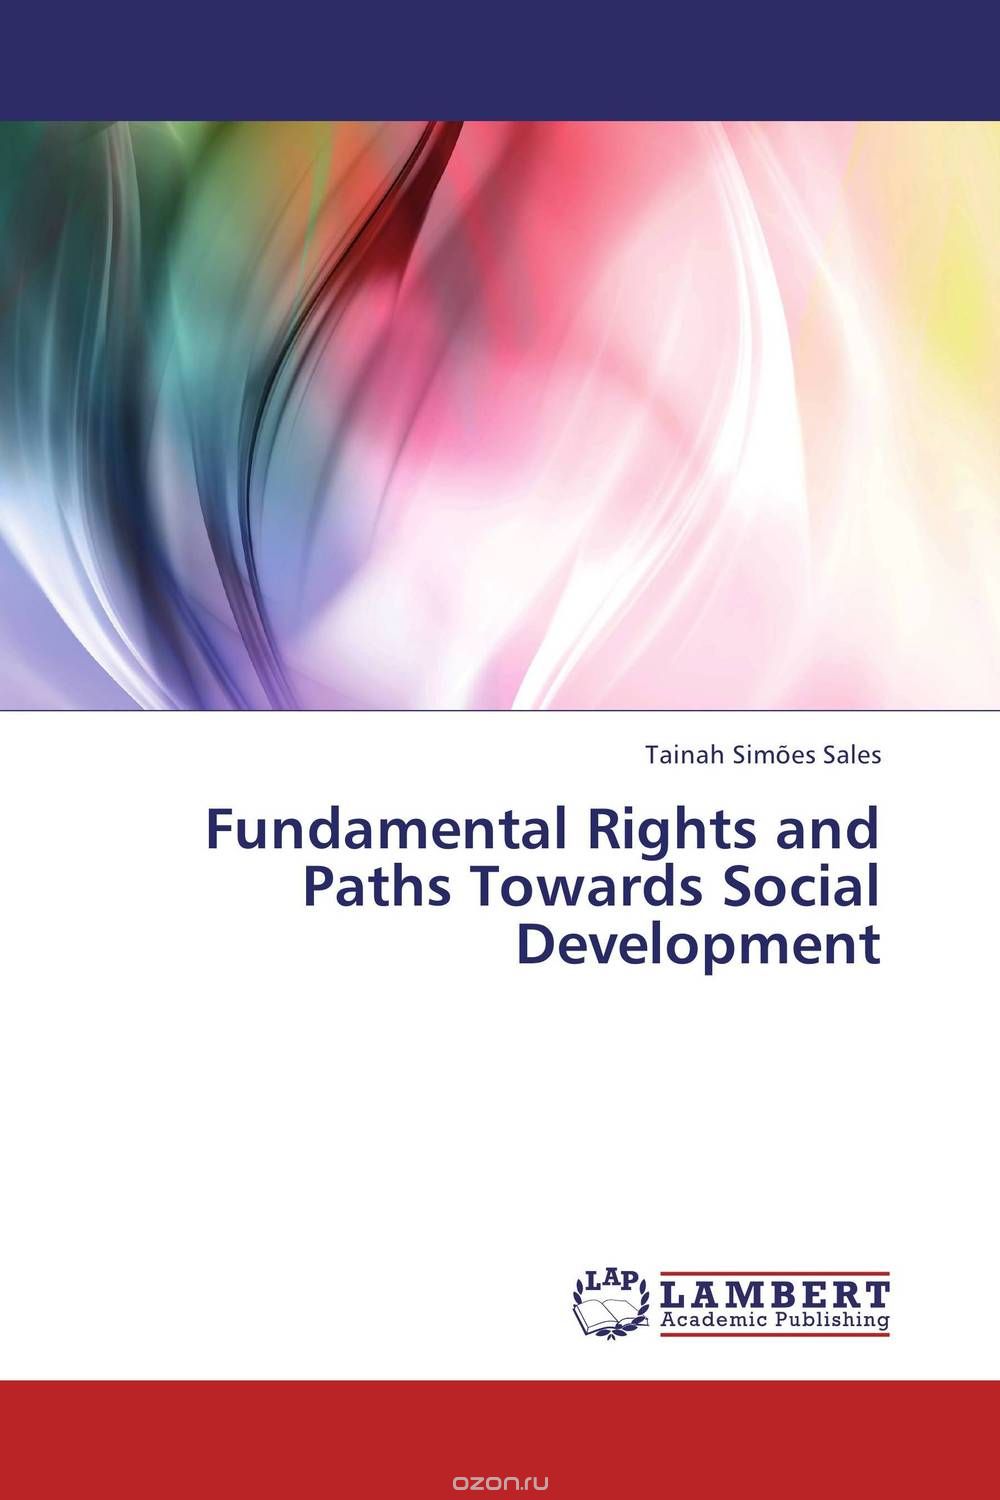 Fundamental Rights and Paths Towards Social Development